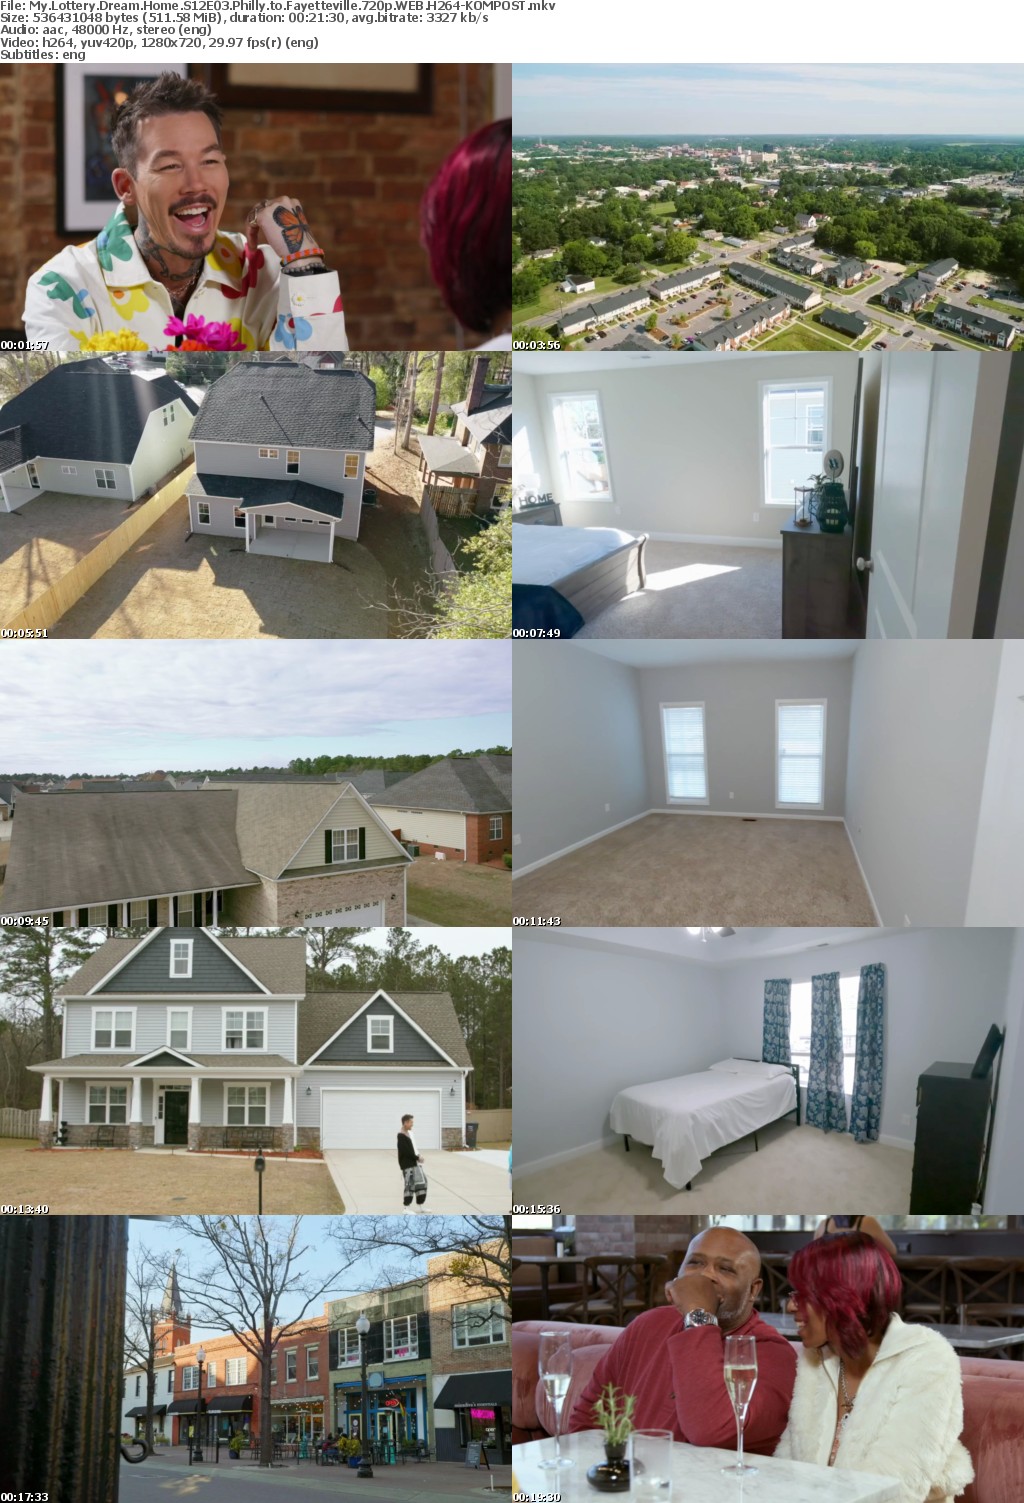 My Lottery Dream Home S12E03 Philly to Fayetteville 720p WEB H264-KOMPOST